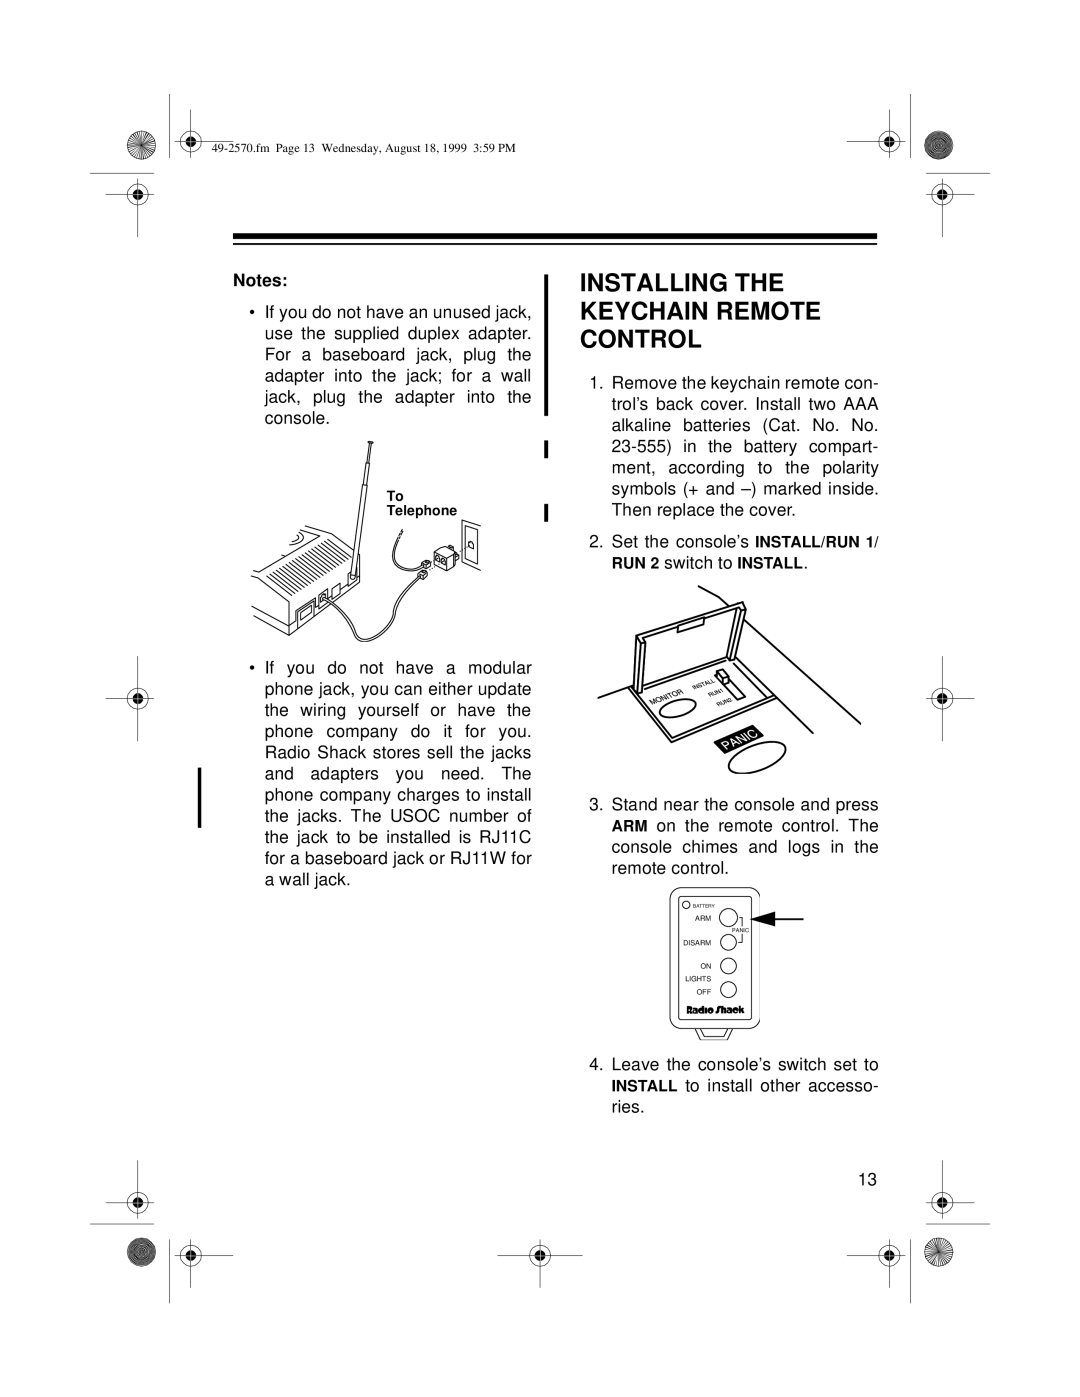 Radio Shack 49-2570 owner manual Installing The Keychain Remote Control 